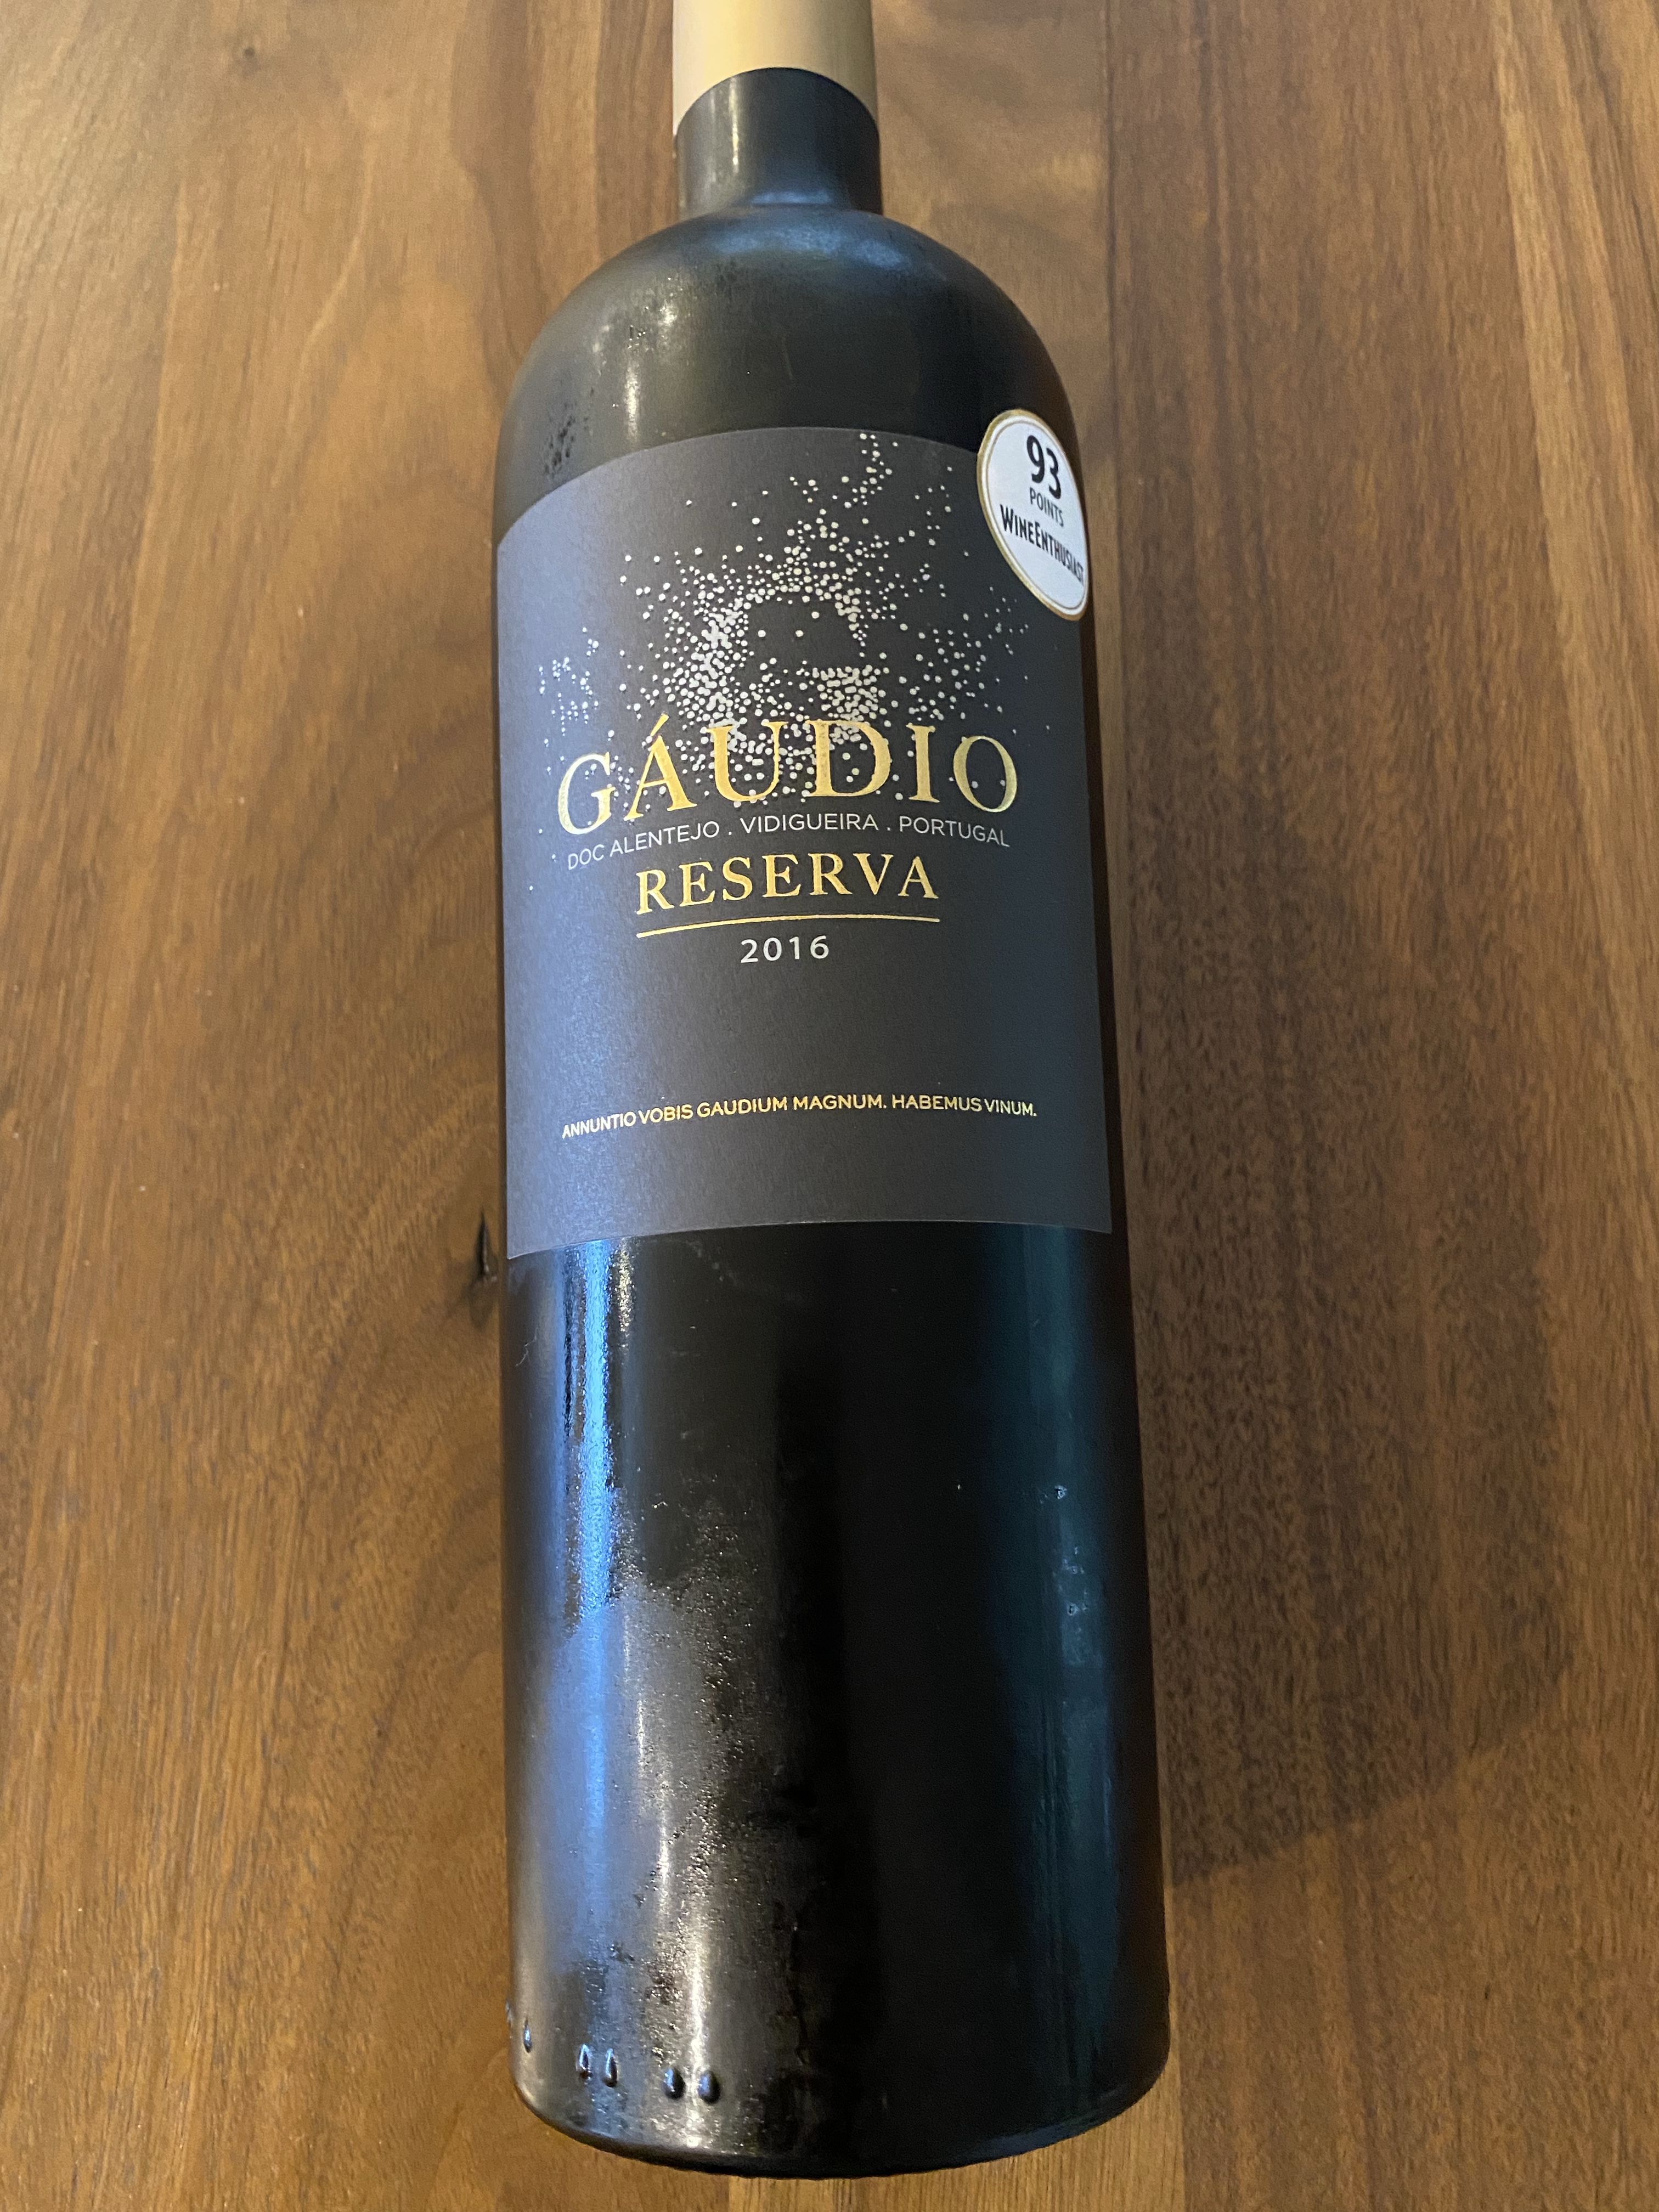 Front label of the f2016 Gaudio Reserva Red Blend, Alentejo, Portugal - just $8.79 at our local Costco